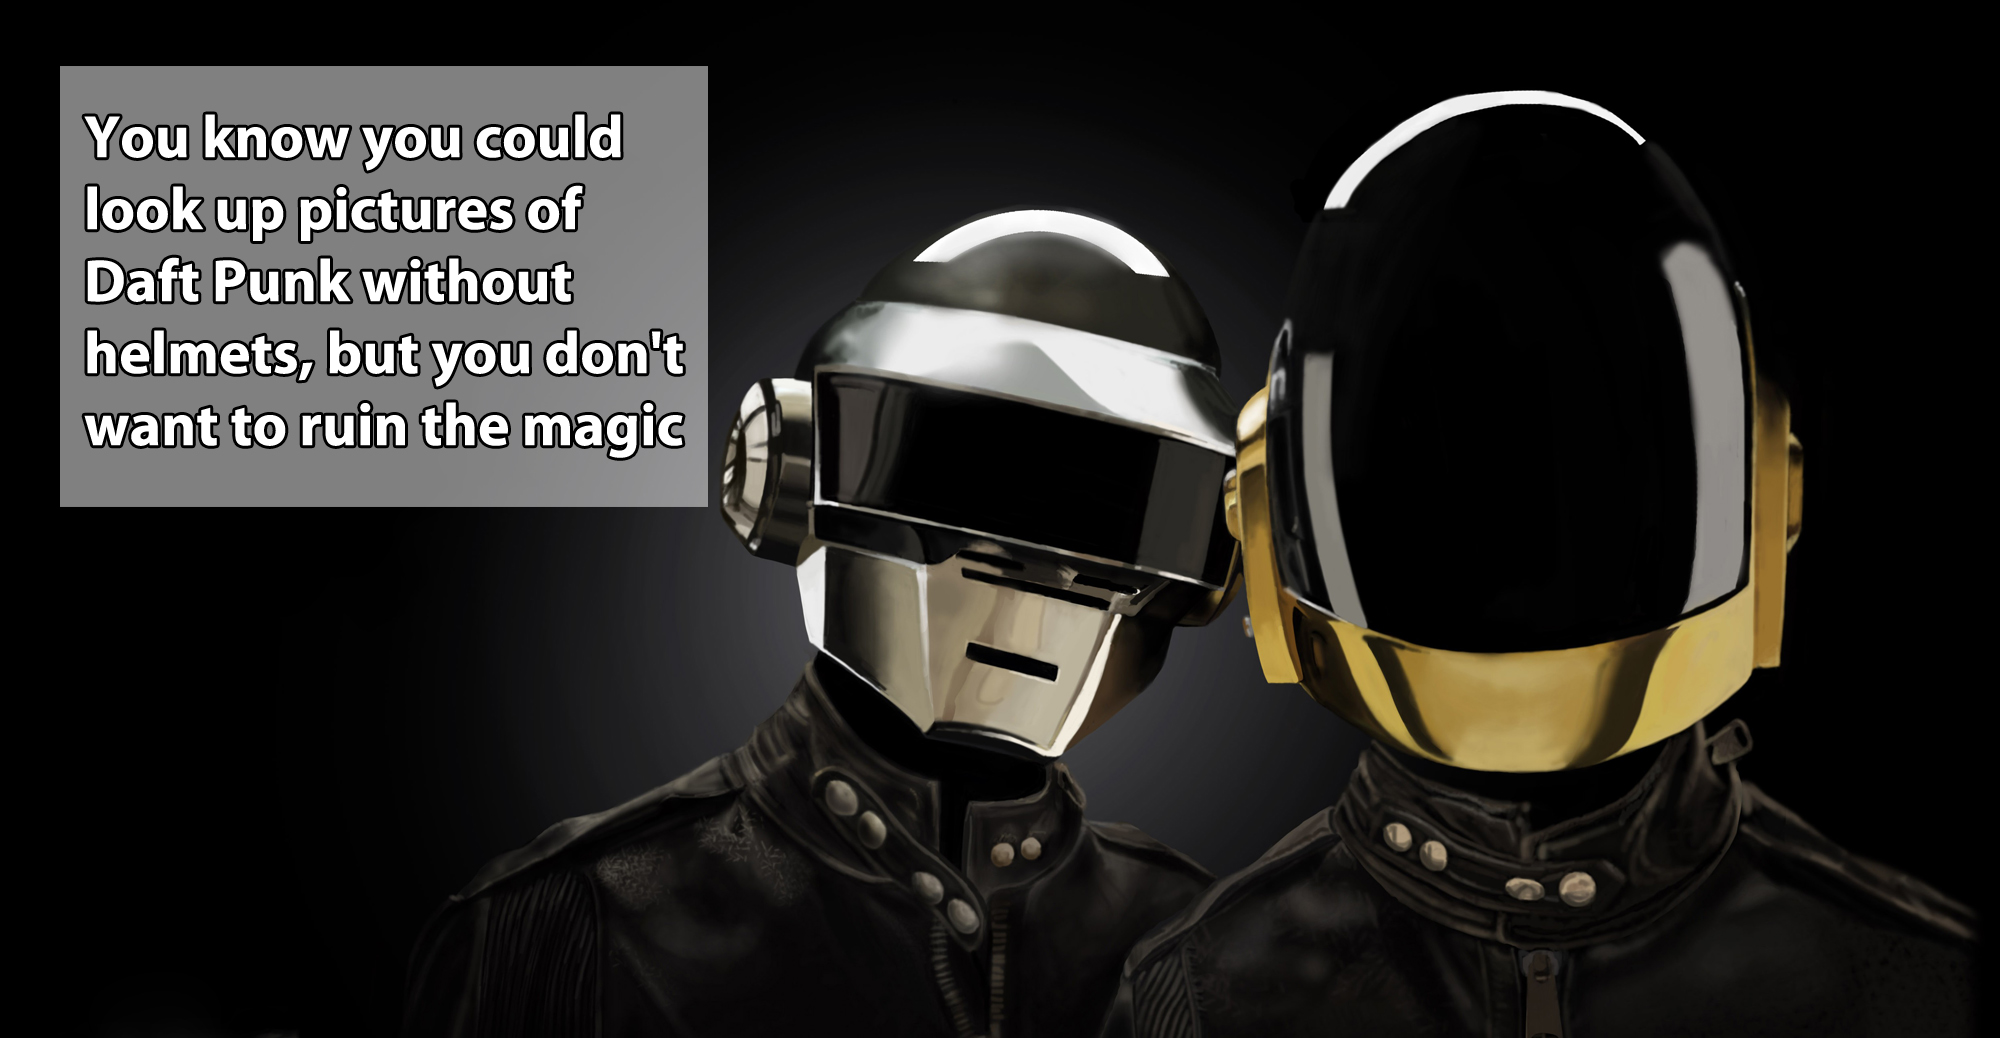 You know you could look up pictures of Daft Punk without helmets, but you don't want to ruin the magic